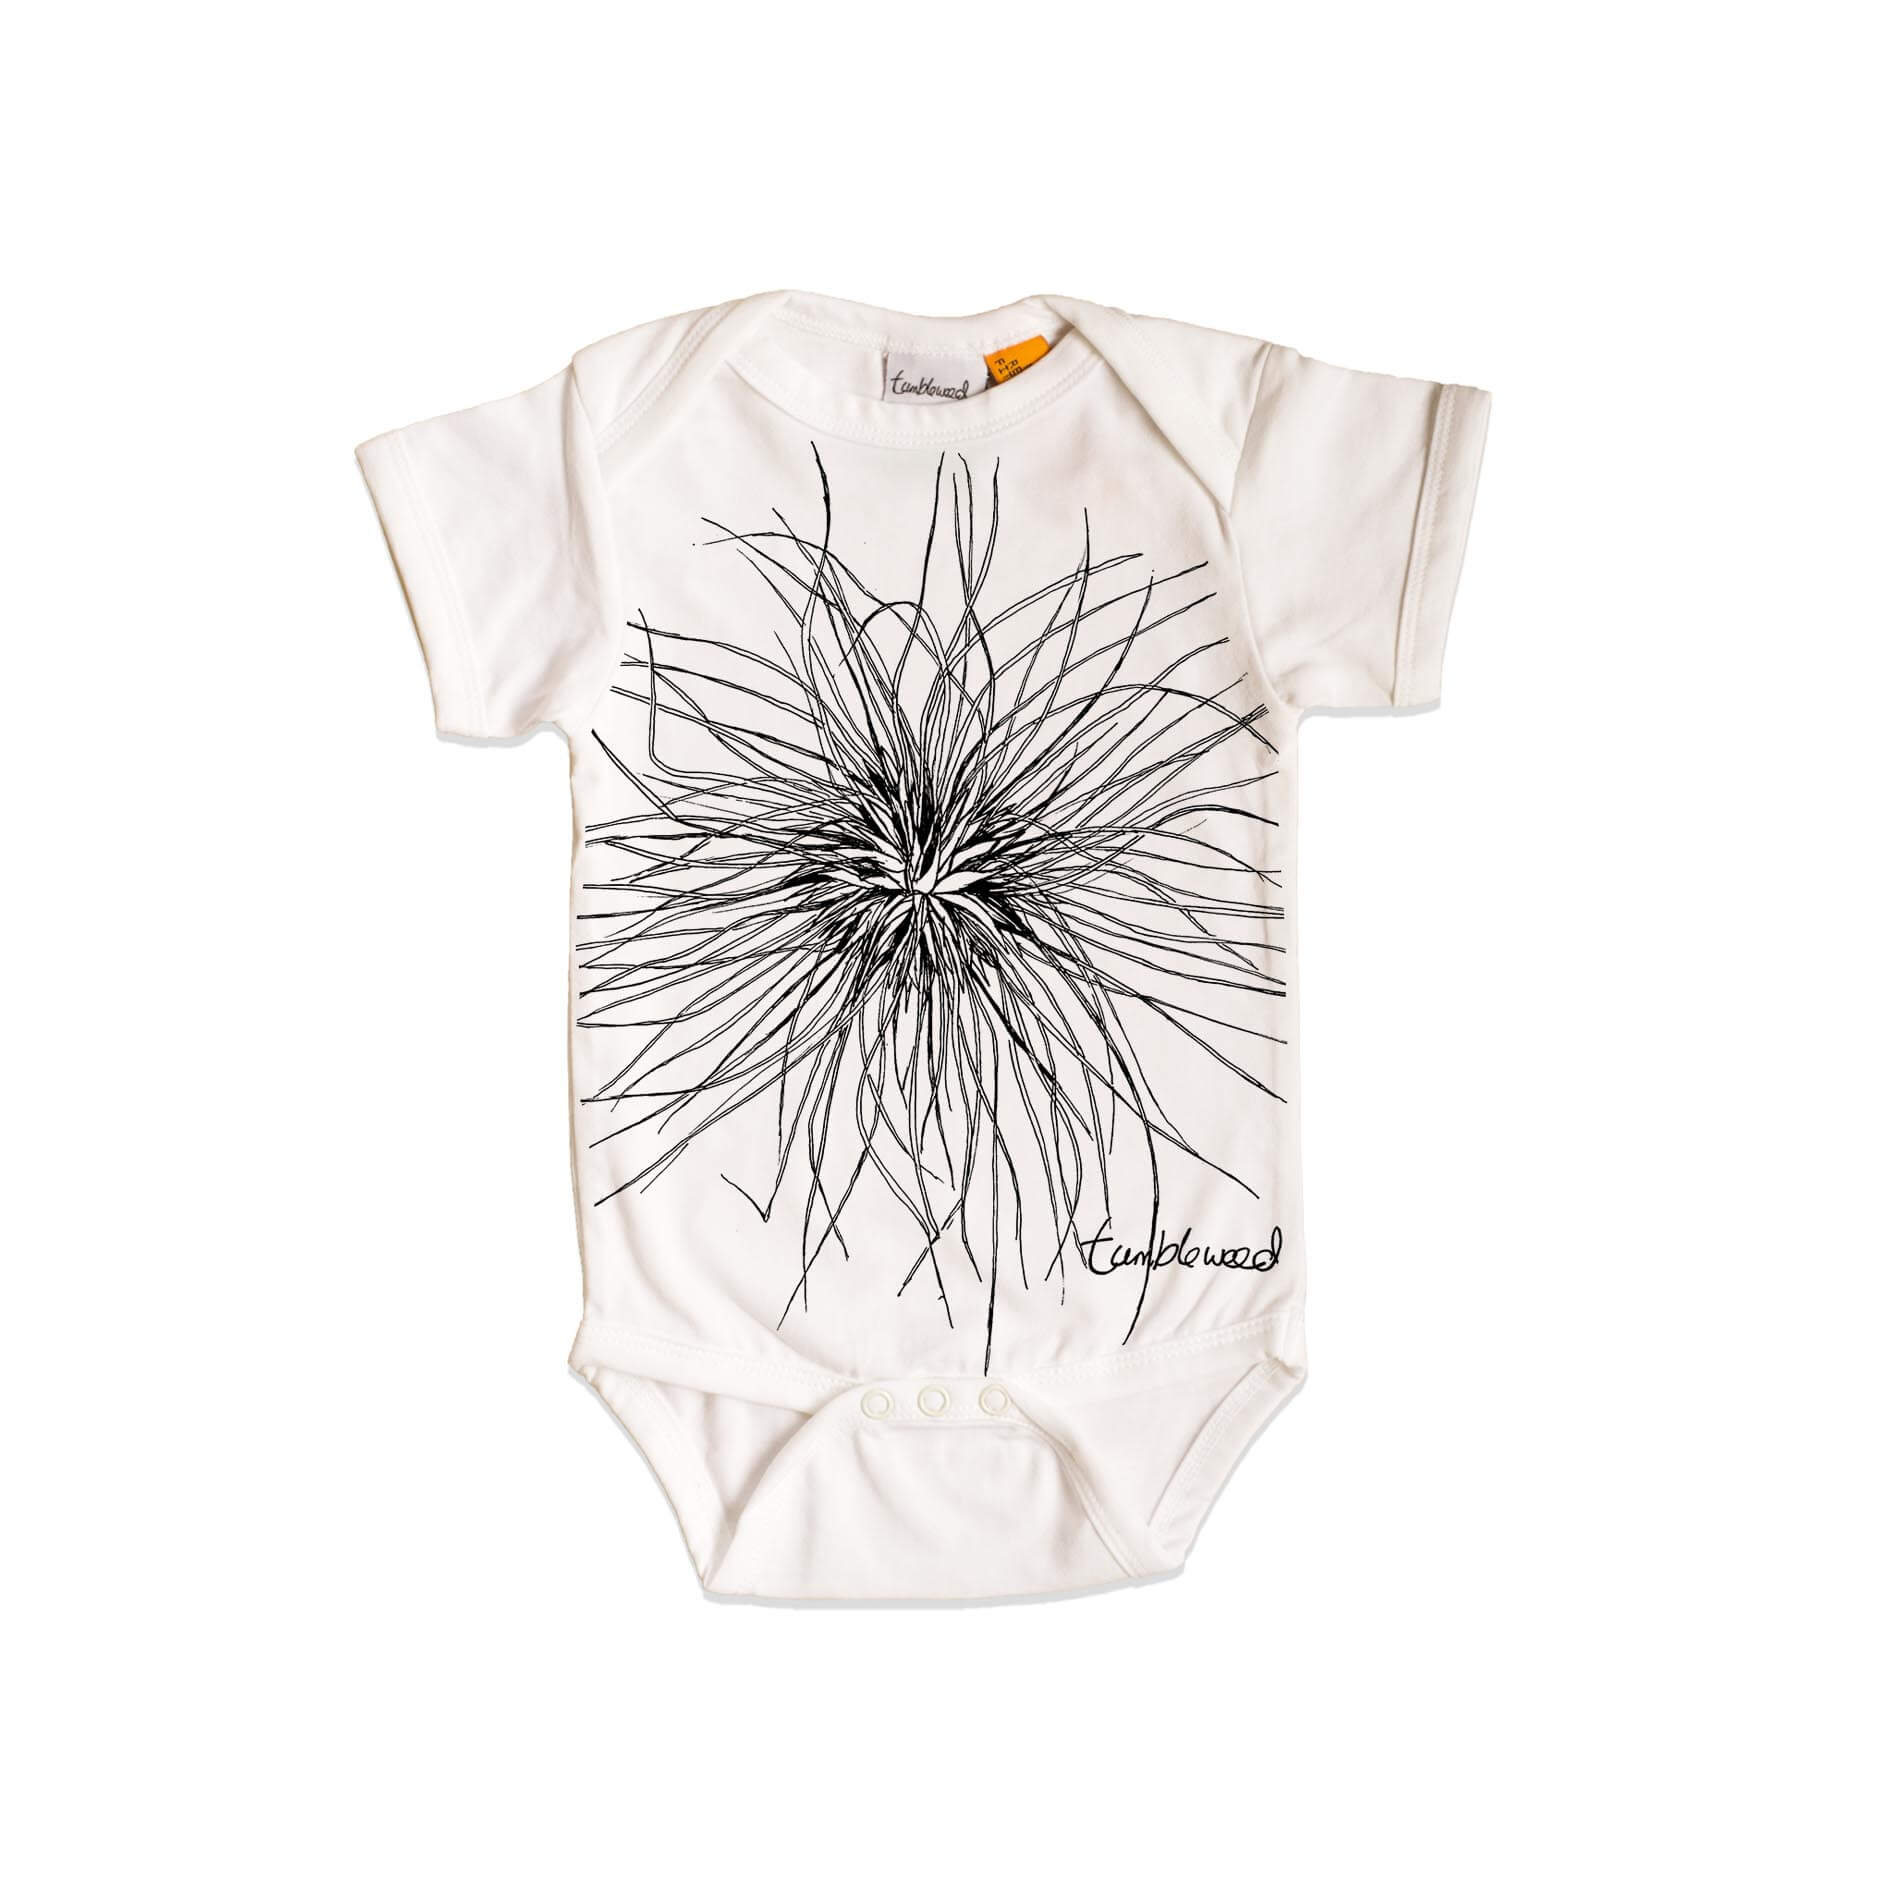 Short sleeved, white, organic cotton, baby onesie featuring a screen printed Tumbleweed/Spinifex design.